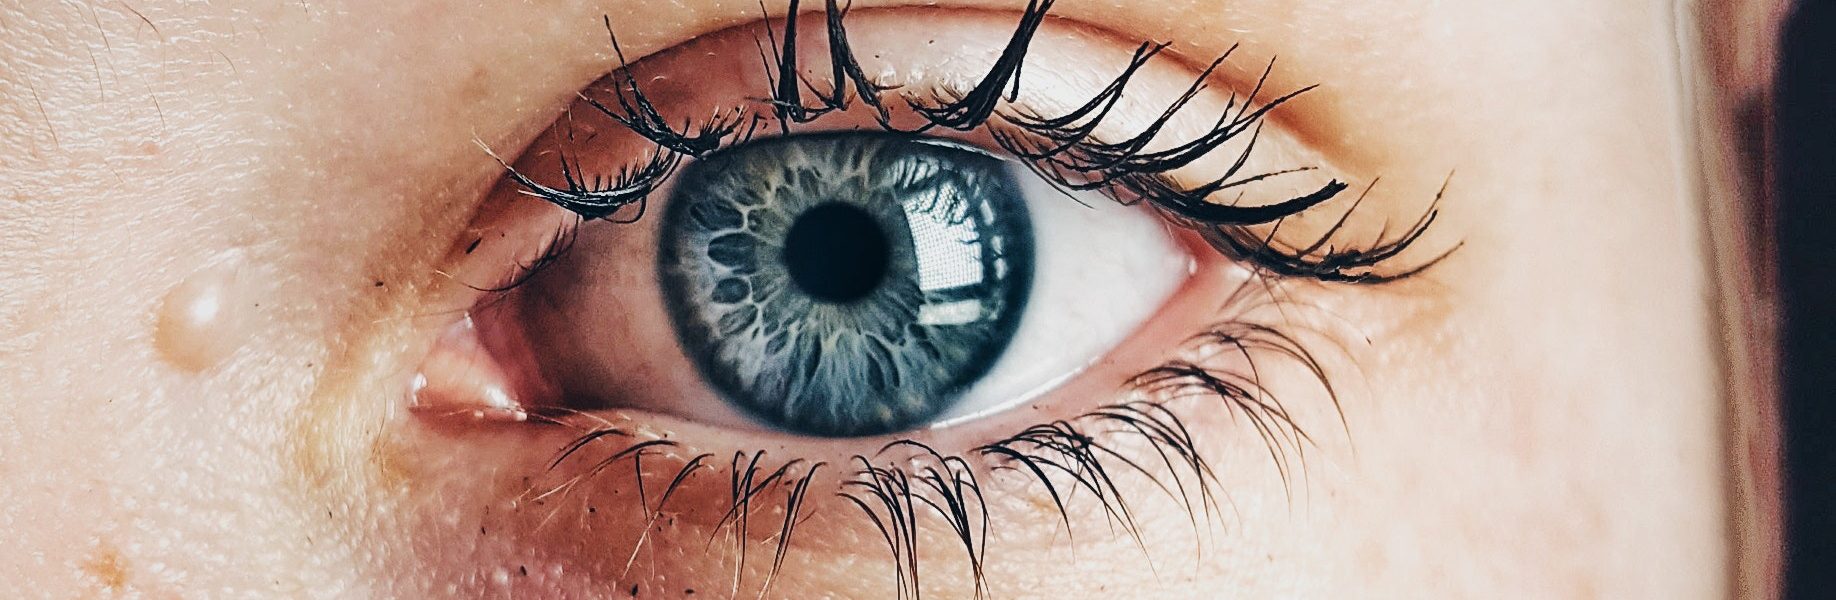 What Should I Expect My Vision to Be Like for The First Few Weeks After Surgery? banner